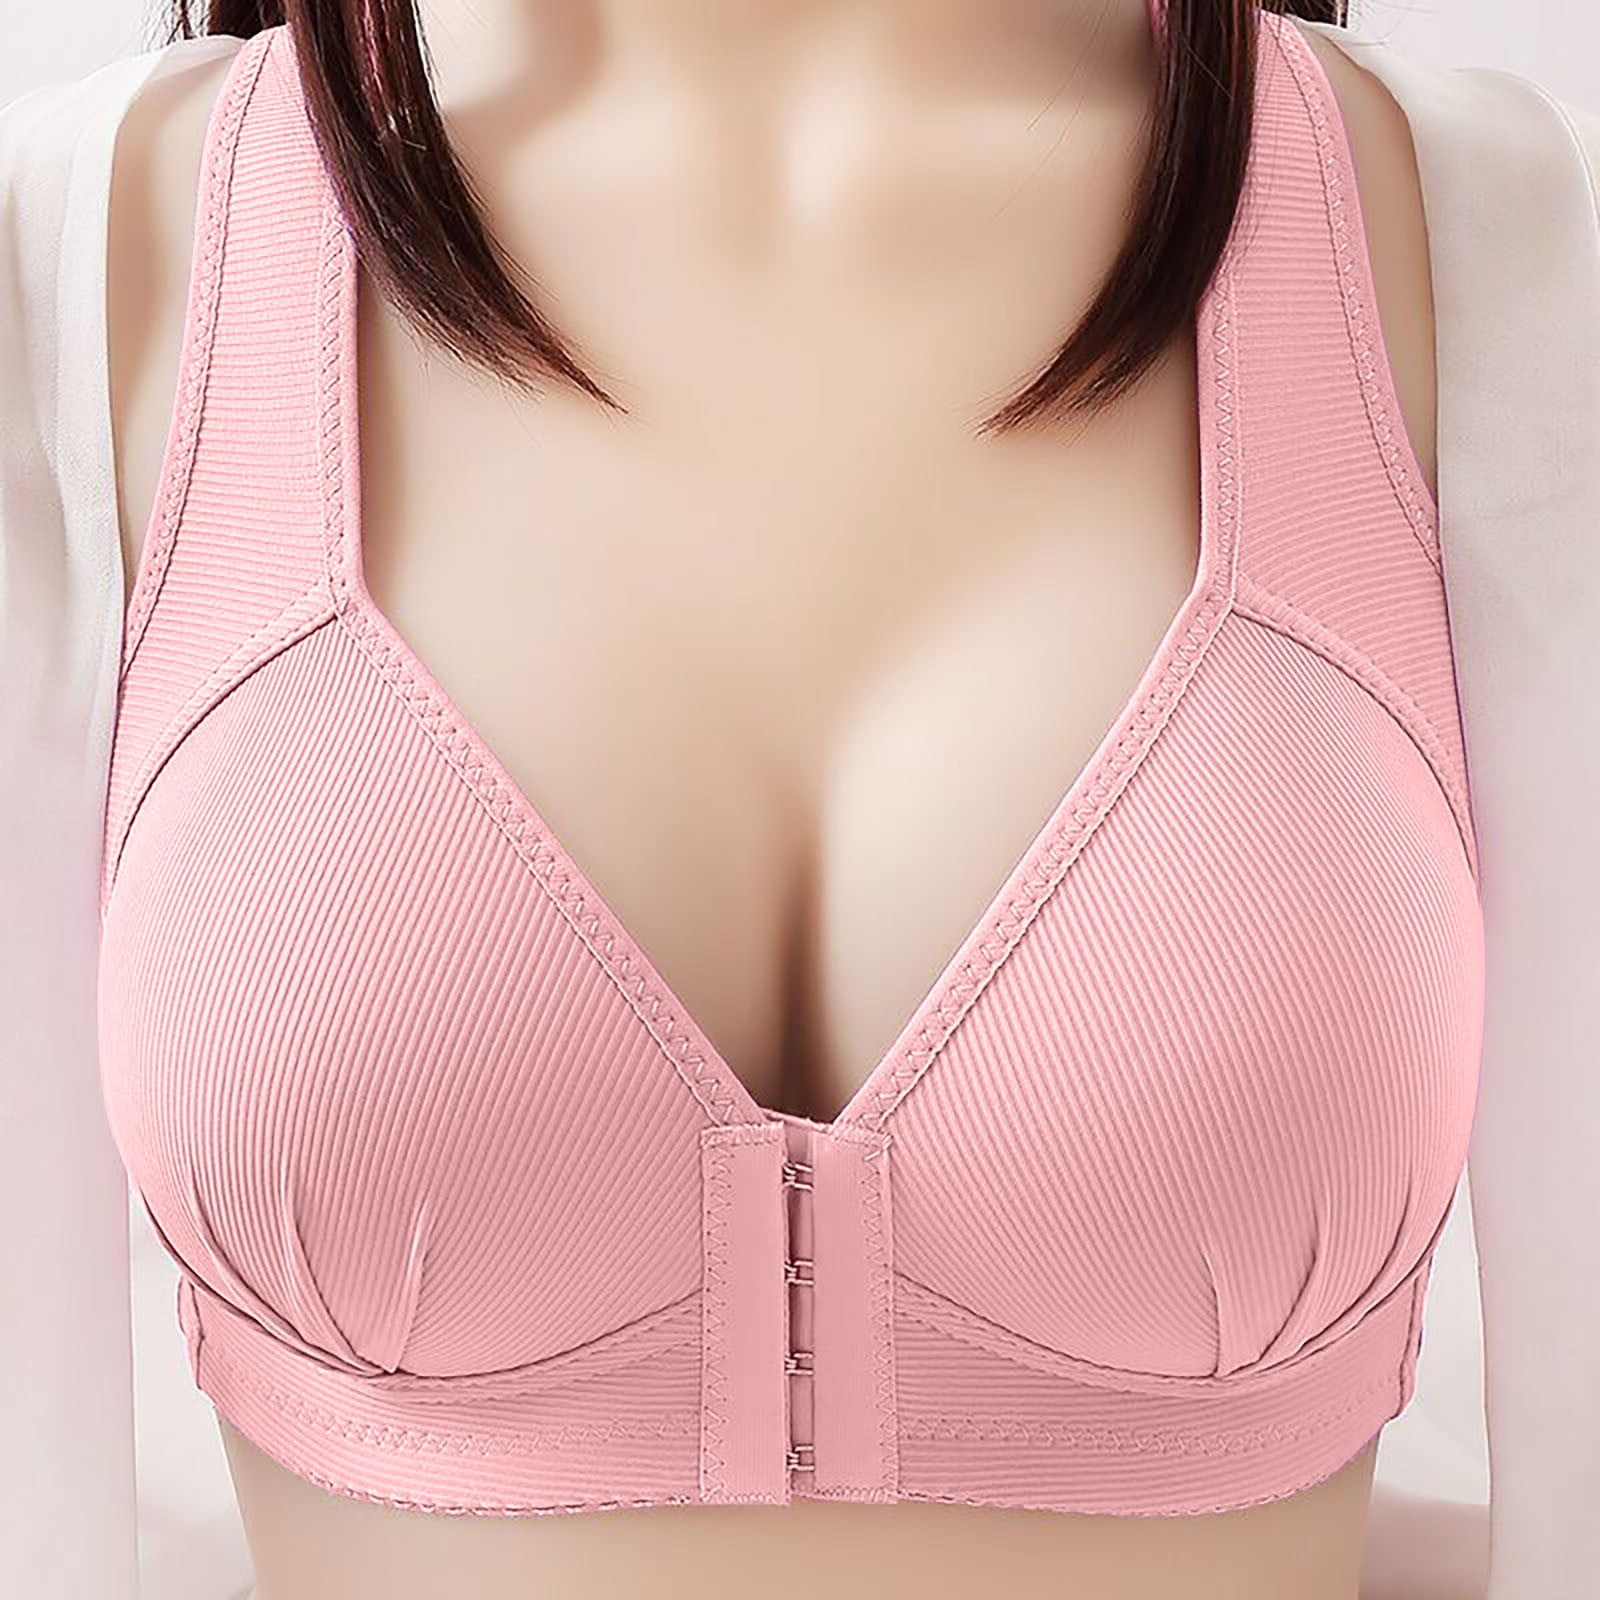 Women's Front Closure Wireless Underwear Compression Sports Bra Full  Coverage Bras Small to Plus Size Everyday Wear (Pink, 40/90)